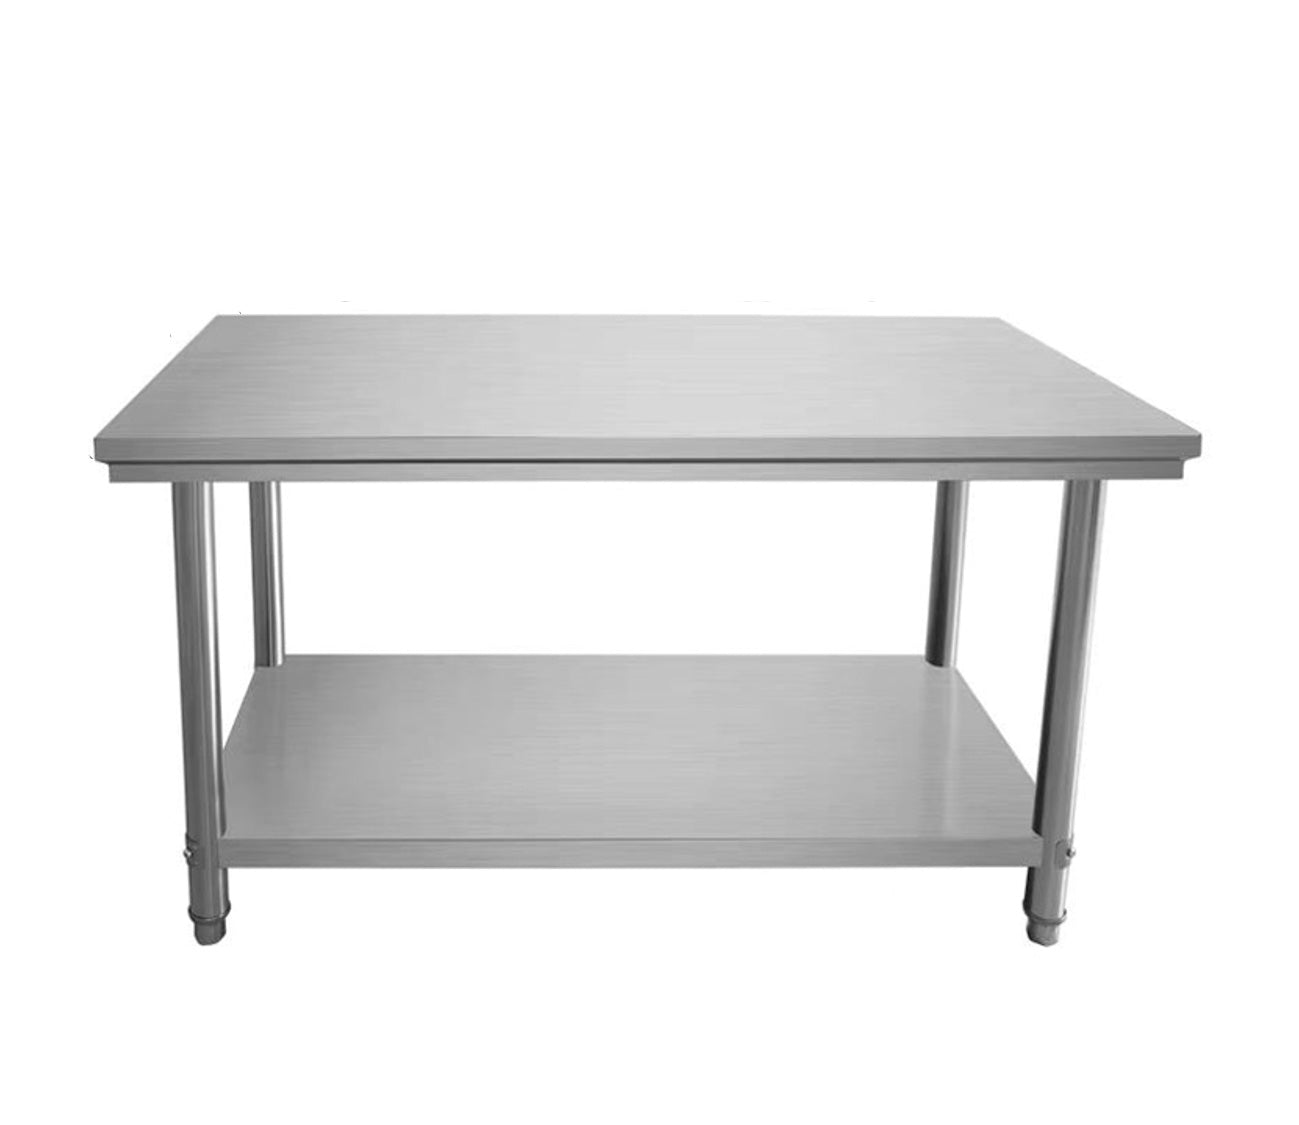 2 Tier Stainless Steel Table (80cm Variant)